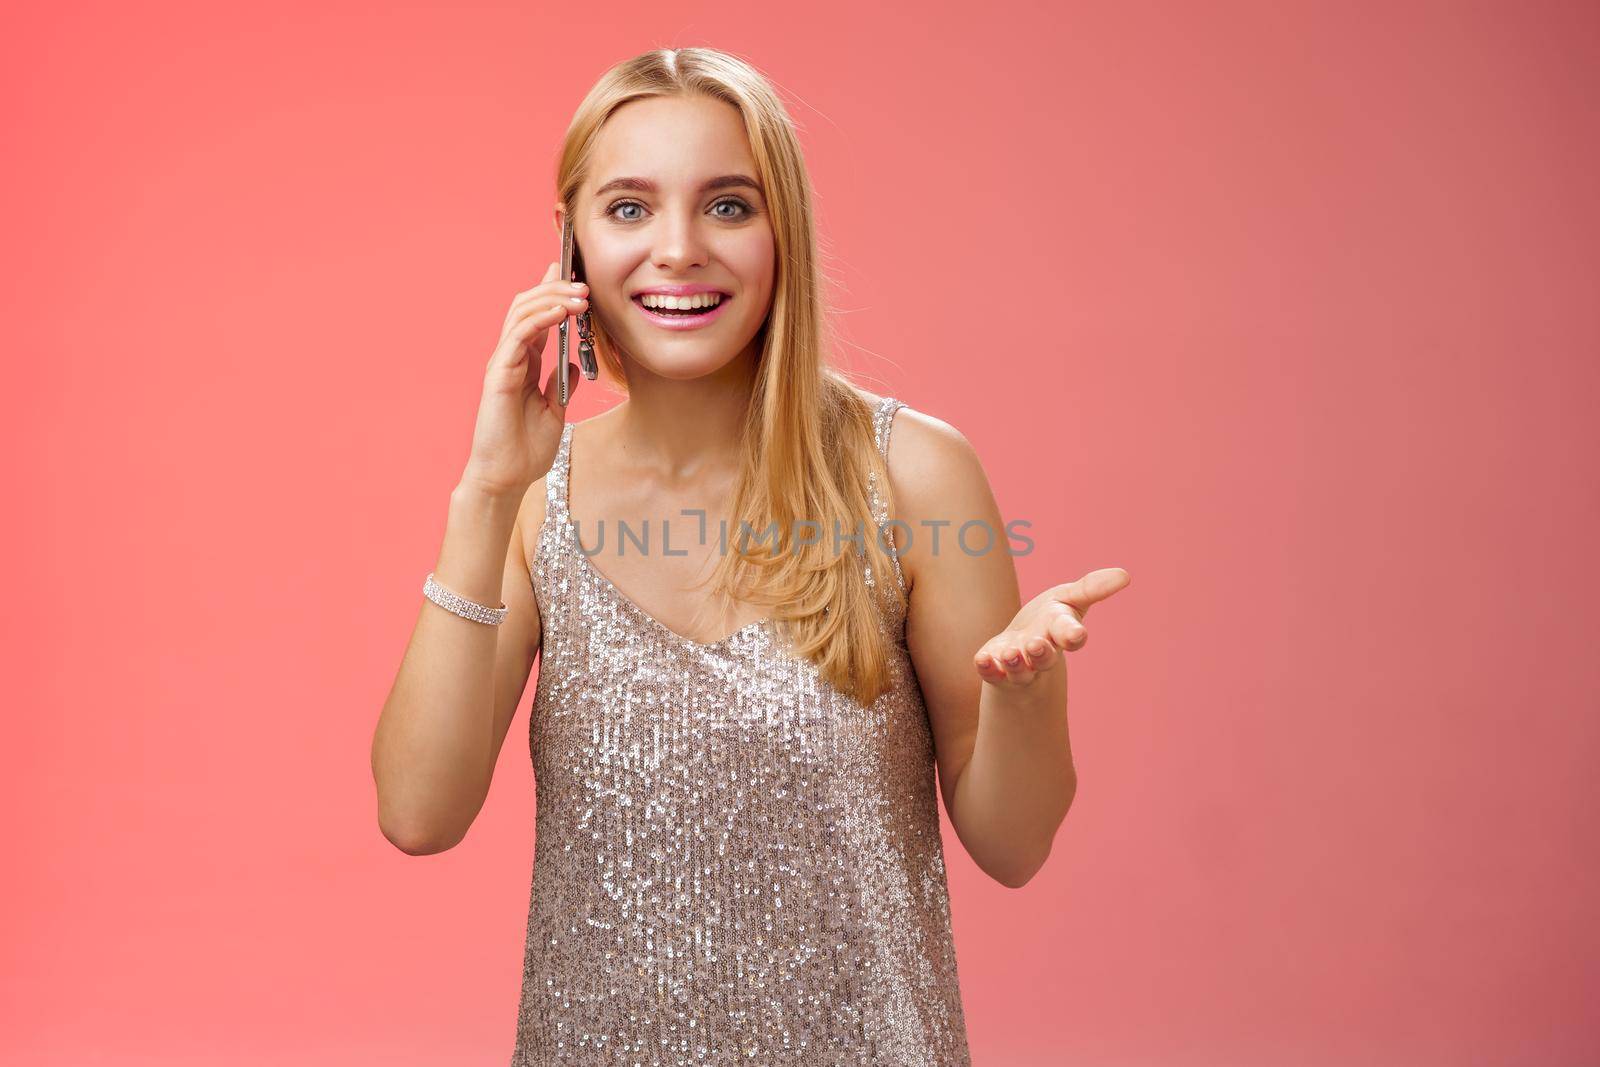 Joyful talkative outgoing attractive blond woman talking friend smartphone gesturing amused smiling broadly retelling fresh rumors after party wearing silver stylish dress, red background.